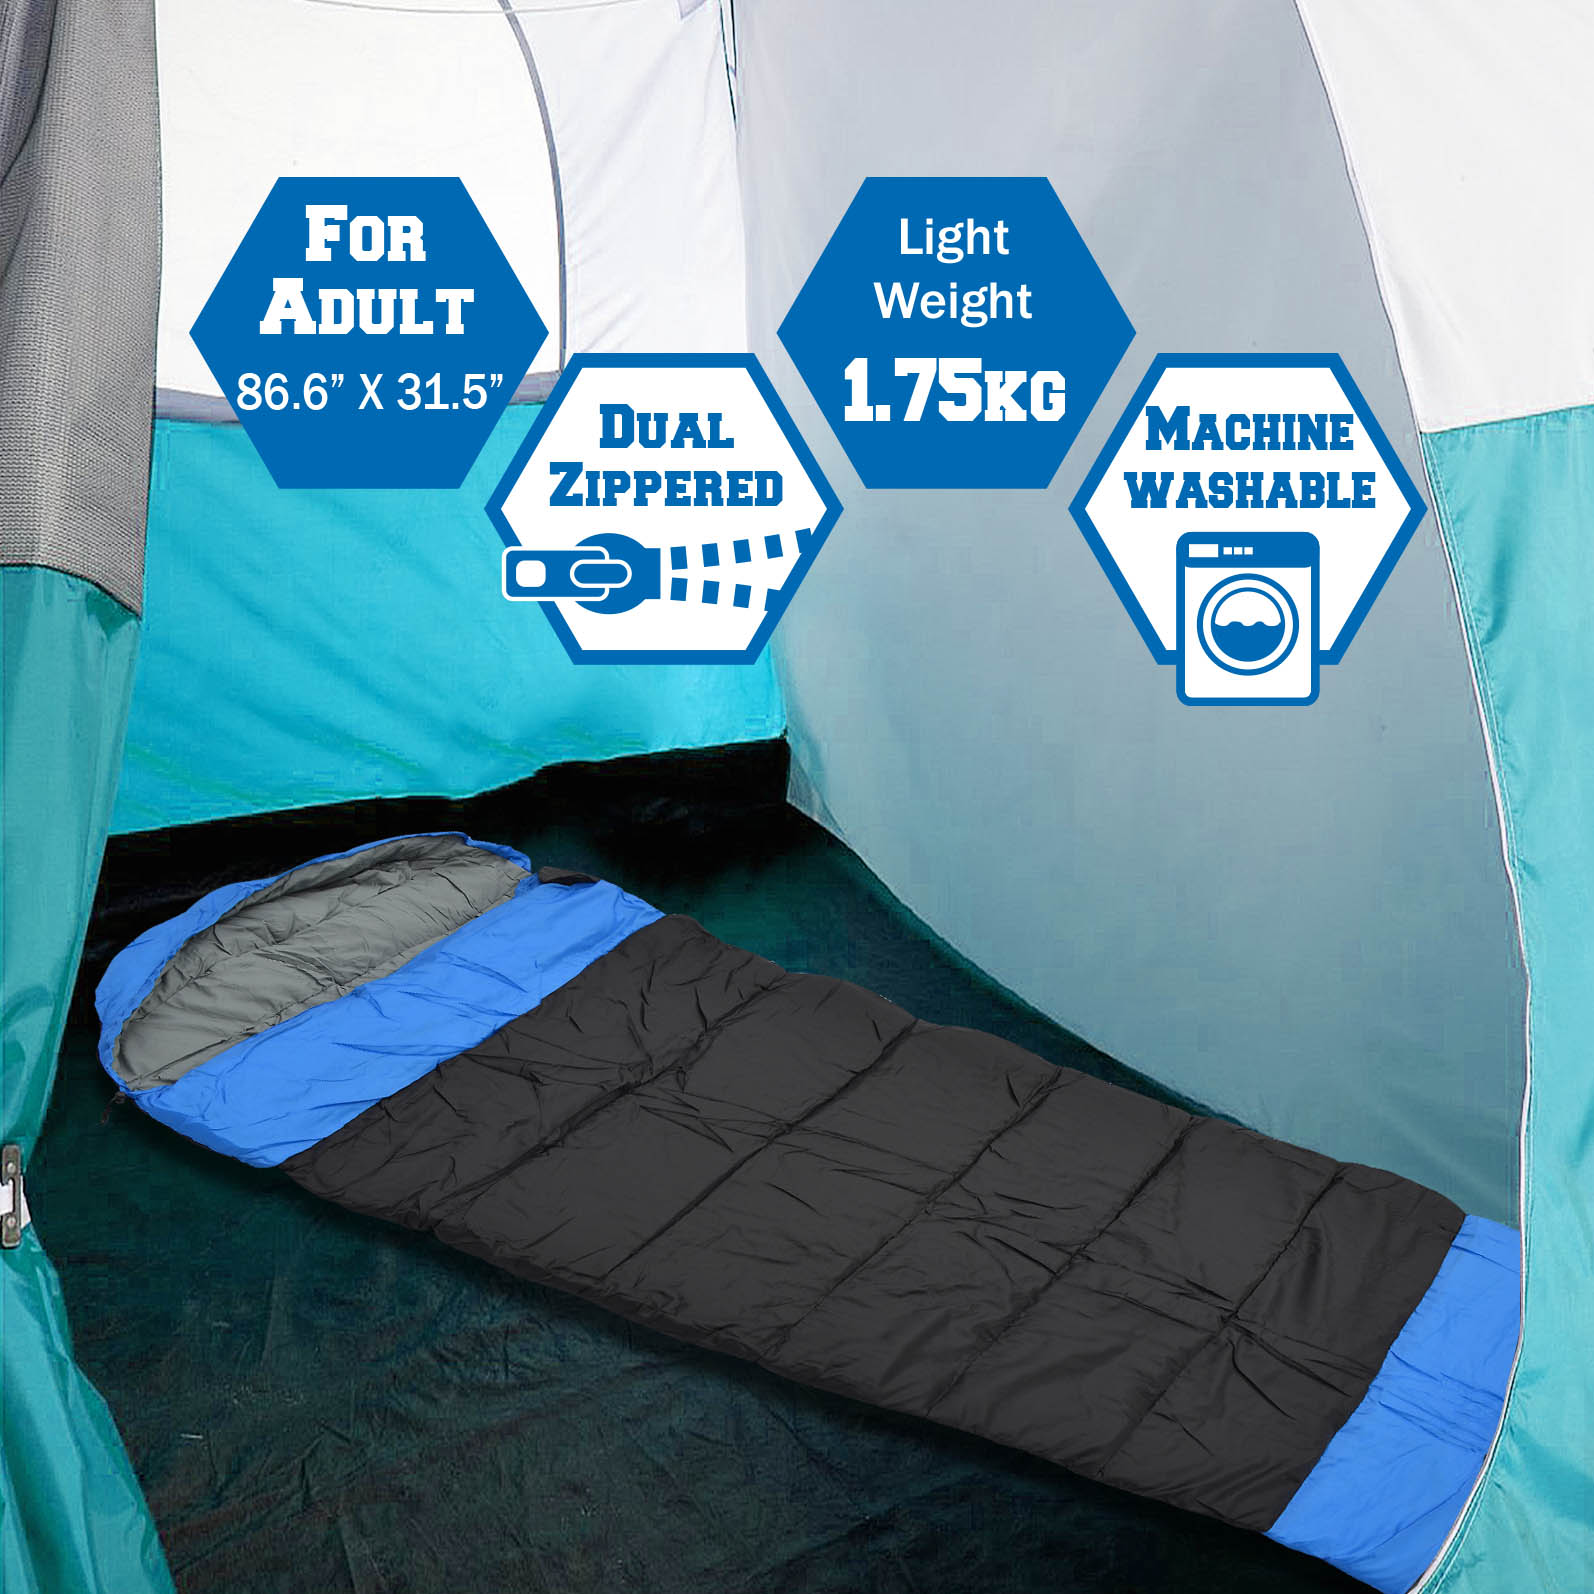 Sunrise Hooded Sleeping Bag Outdoor Camping or Indoor Sleep with Carry Bag(Blue) - image 3 of 9